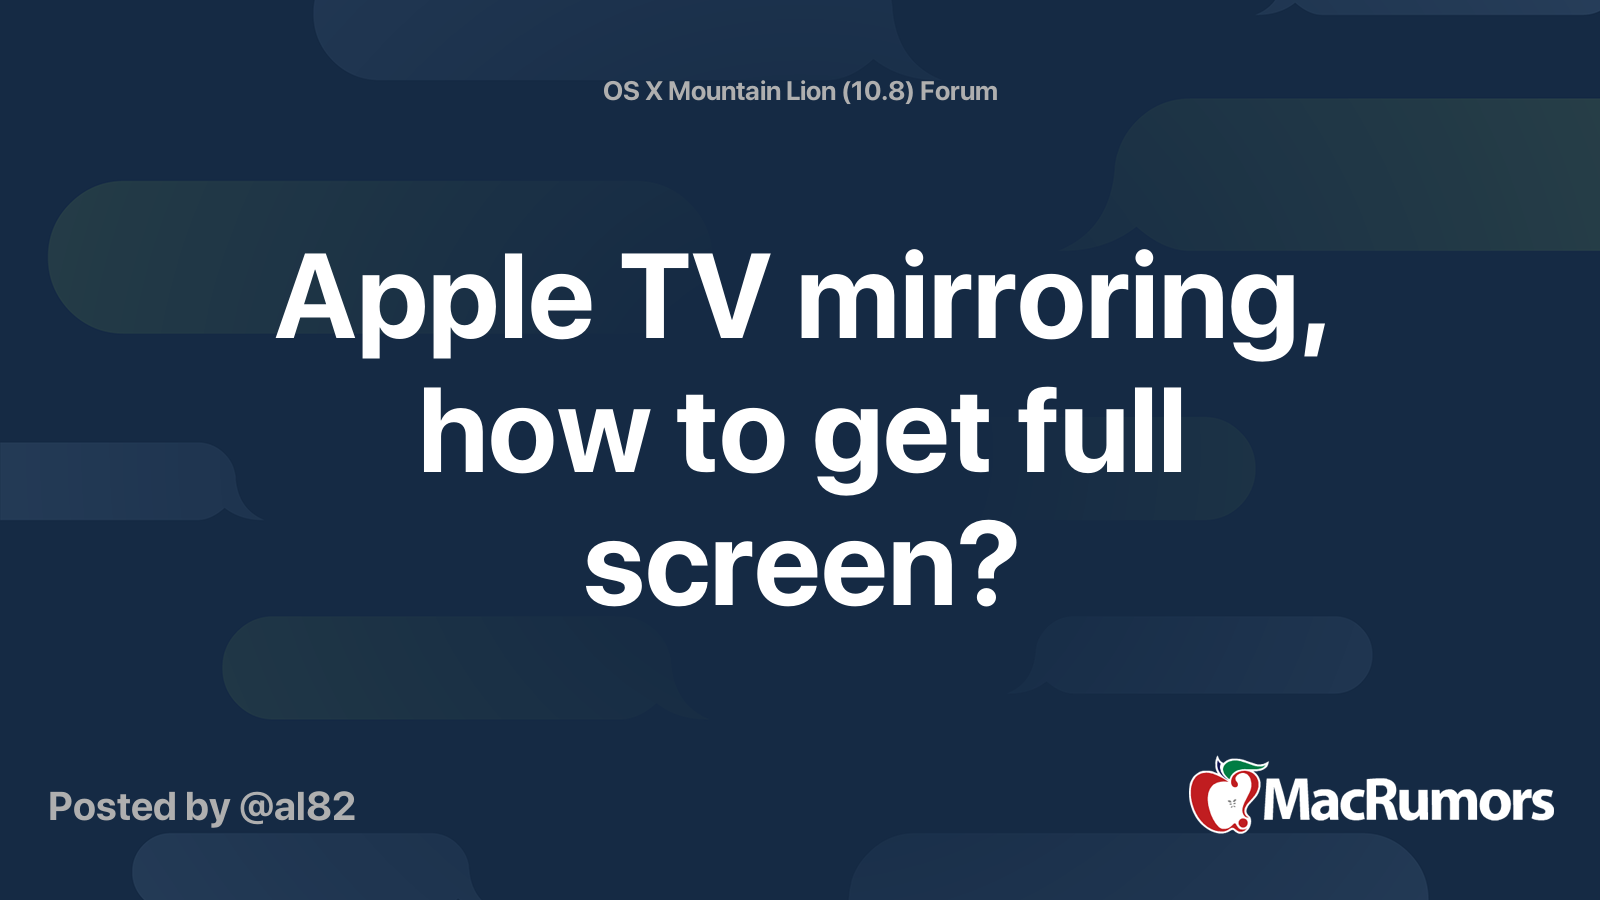 Apple Tv Mirroring How To Get Full, Ipad Air Apple Tv Mirroring Full Screen